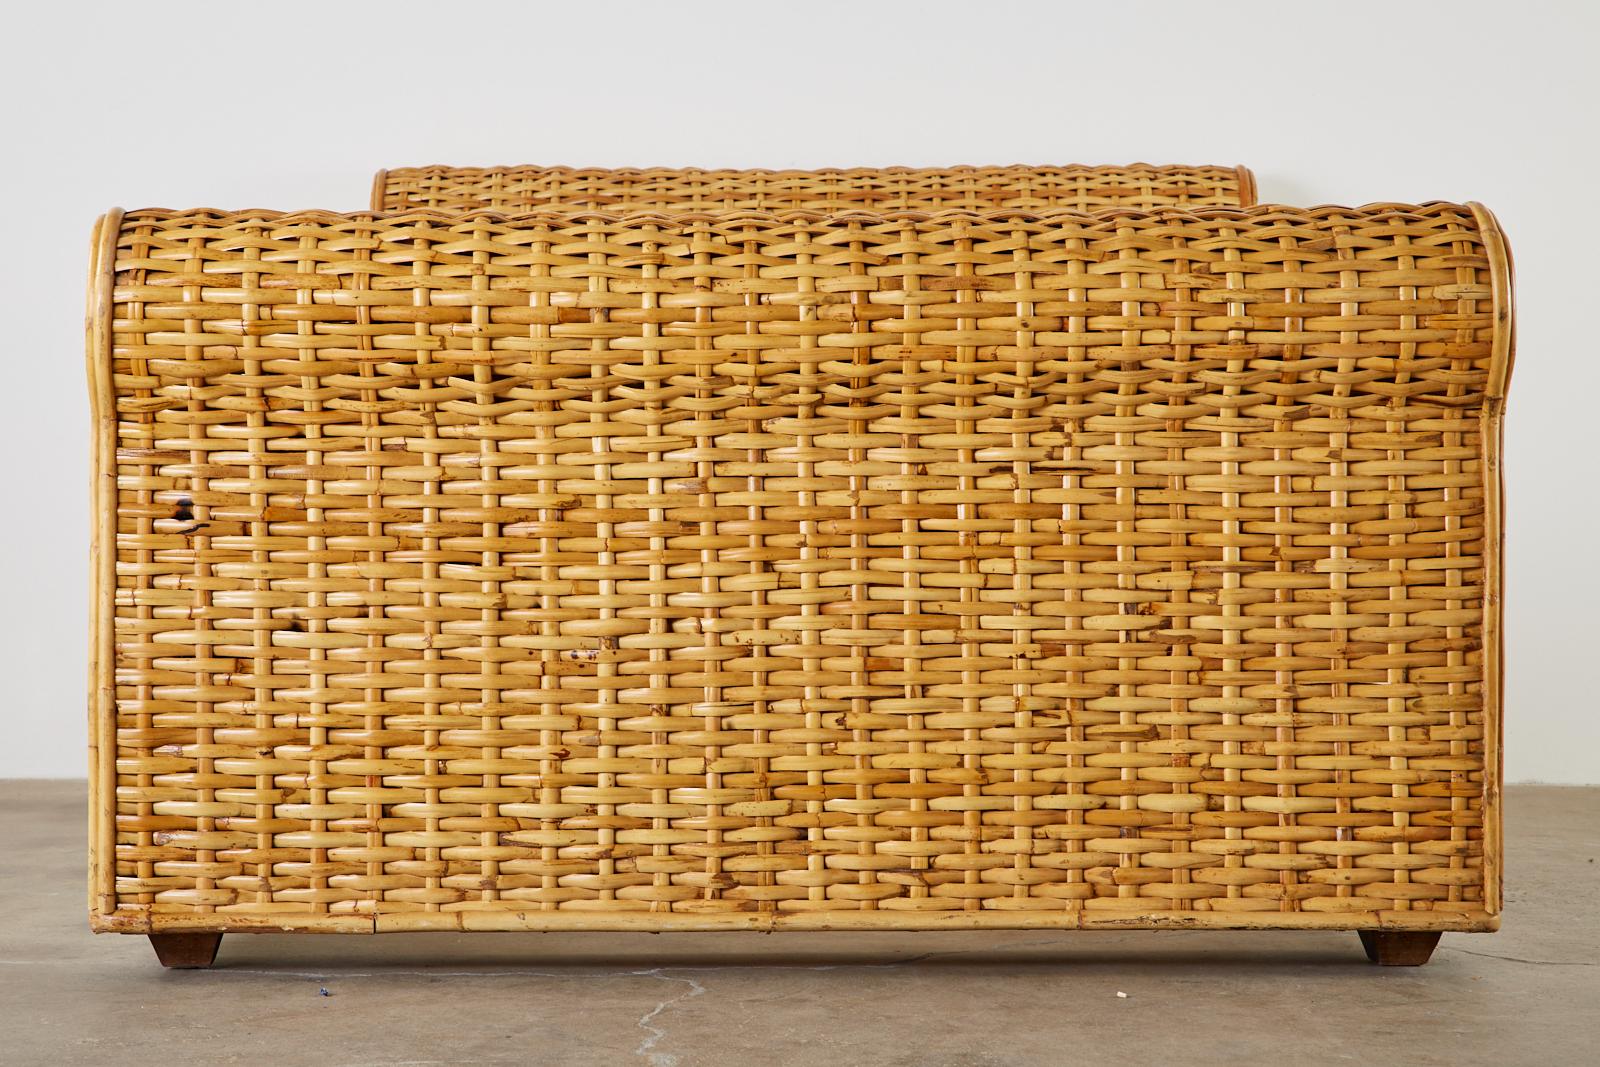 Organic Modern Ralph Lauren Home Collection Woven Rattan Wicker Bed For Sale